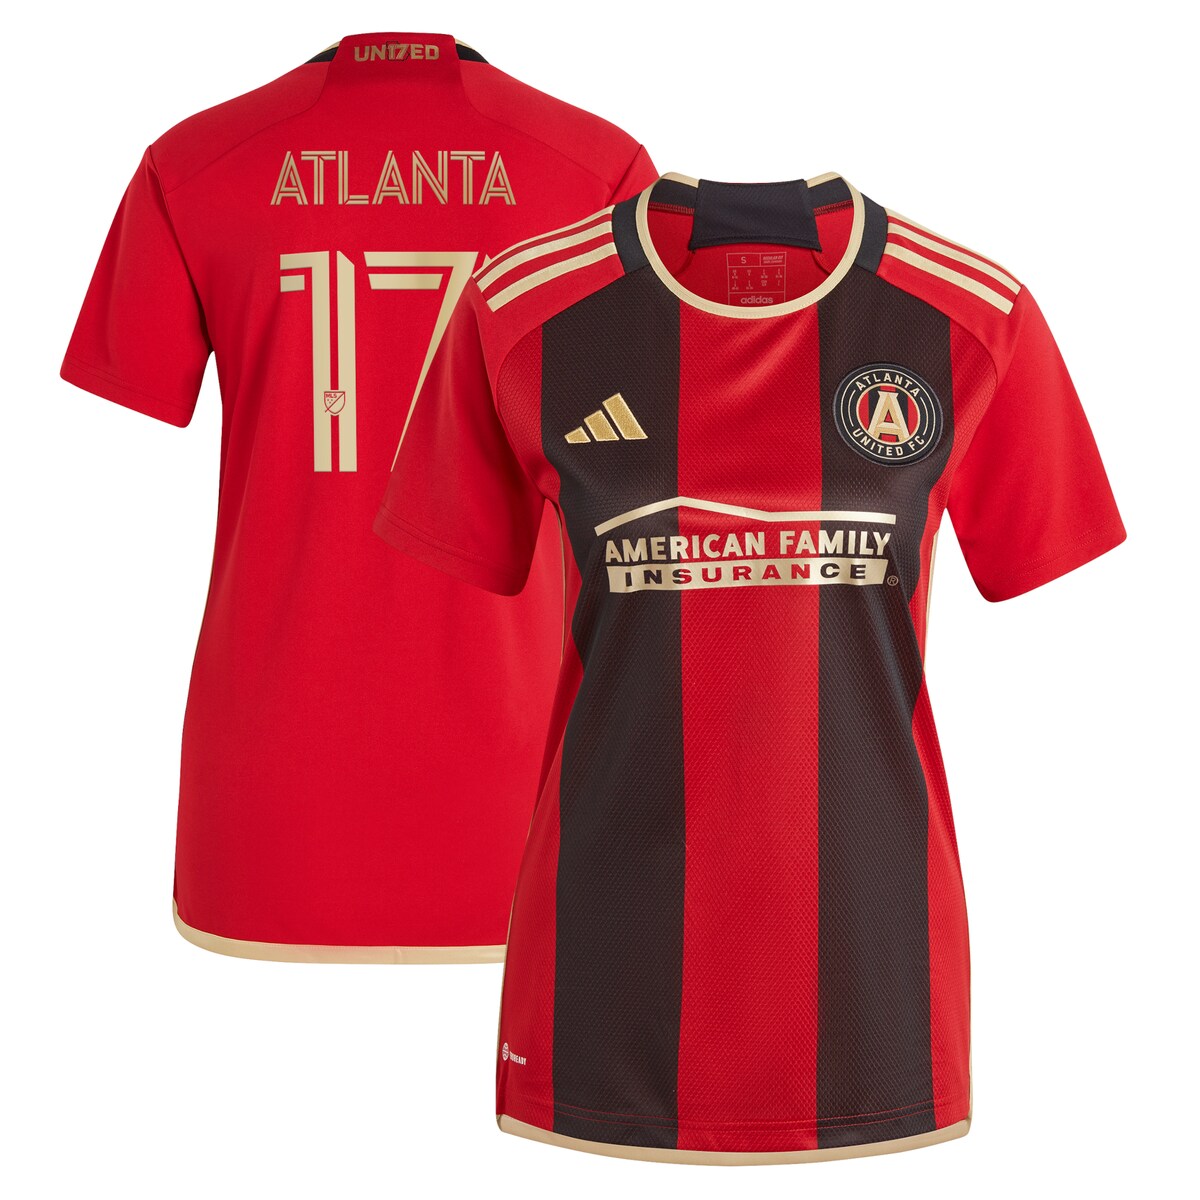 Look and feel like the real deal when you add this 2023 The 17s' Kit Replica Jersey to your Atlanta United FC collection. The jersey is a throwback to when it all started for Atlanta United FC. Every stitch embodies the ''Spirit of 17'' - a masterful reminder that nothing is given and everything must be earned. The ''We are the A'' jock tag also embodies the passion that radiates throughout the club from the players, coaches and fans. The adidas gear features AEROREADY technology as well as ventilated, mesh panels that work together to keep you comfortable and dry wherever you choose to cheer on Atlanta United FC.Replica JerseyJersey Color Style: PrimaryMachine wash, tumble dry lowAEROREADY technology absorbs moisture and makes you feel dryMaterial: 100% PolyesterHeat-sealed sponsor logo on chestEmbroidered adidas logo on right chestVentilated mesh panel insertsSewn on embroidered team crest on left chestImportedOfficially licensedBrand: adidasTagless collar for added comfortBackneck taping -no irritating stitch on the back